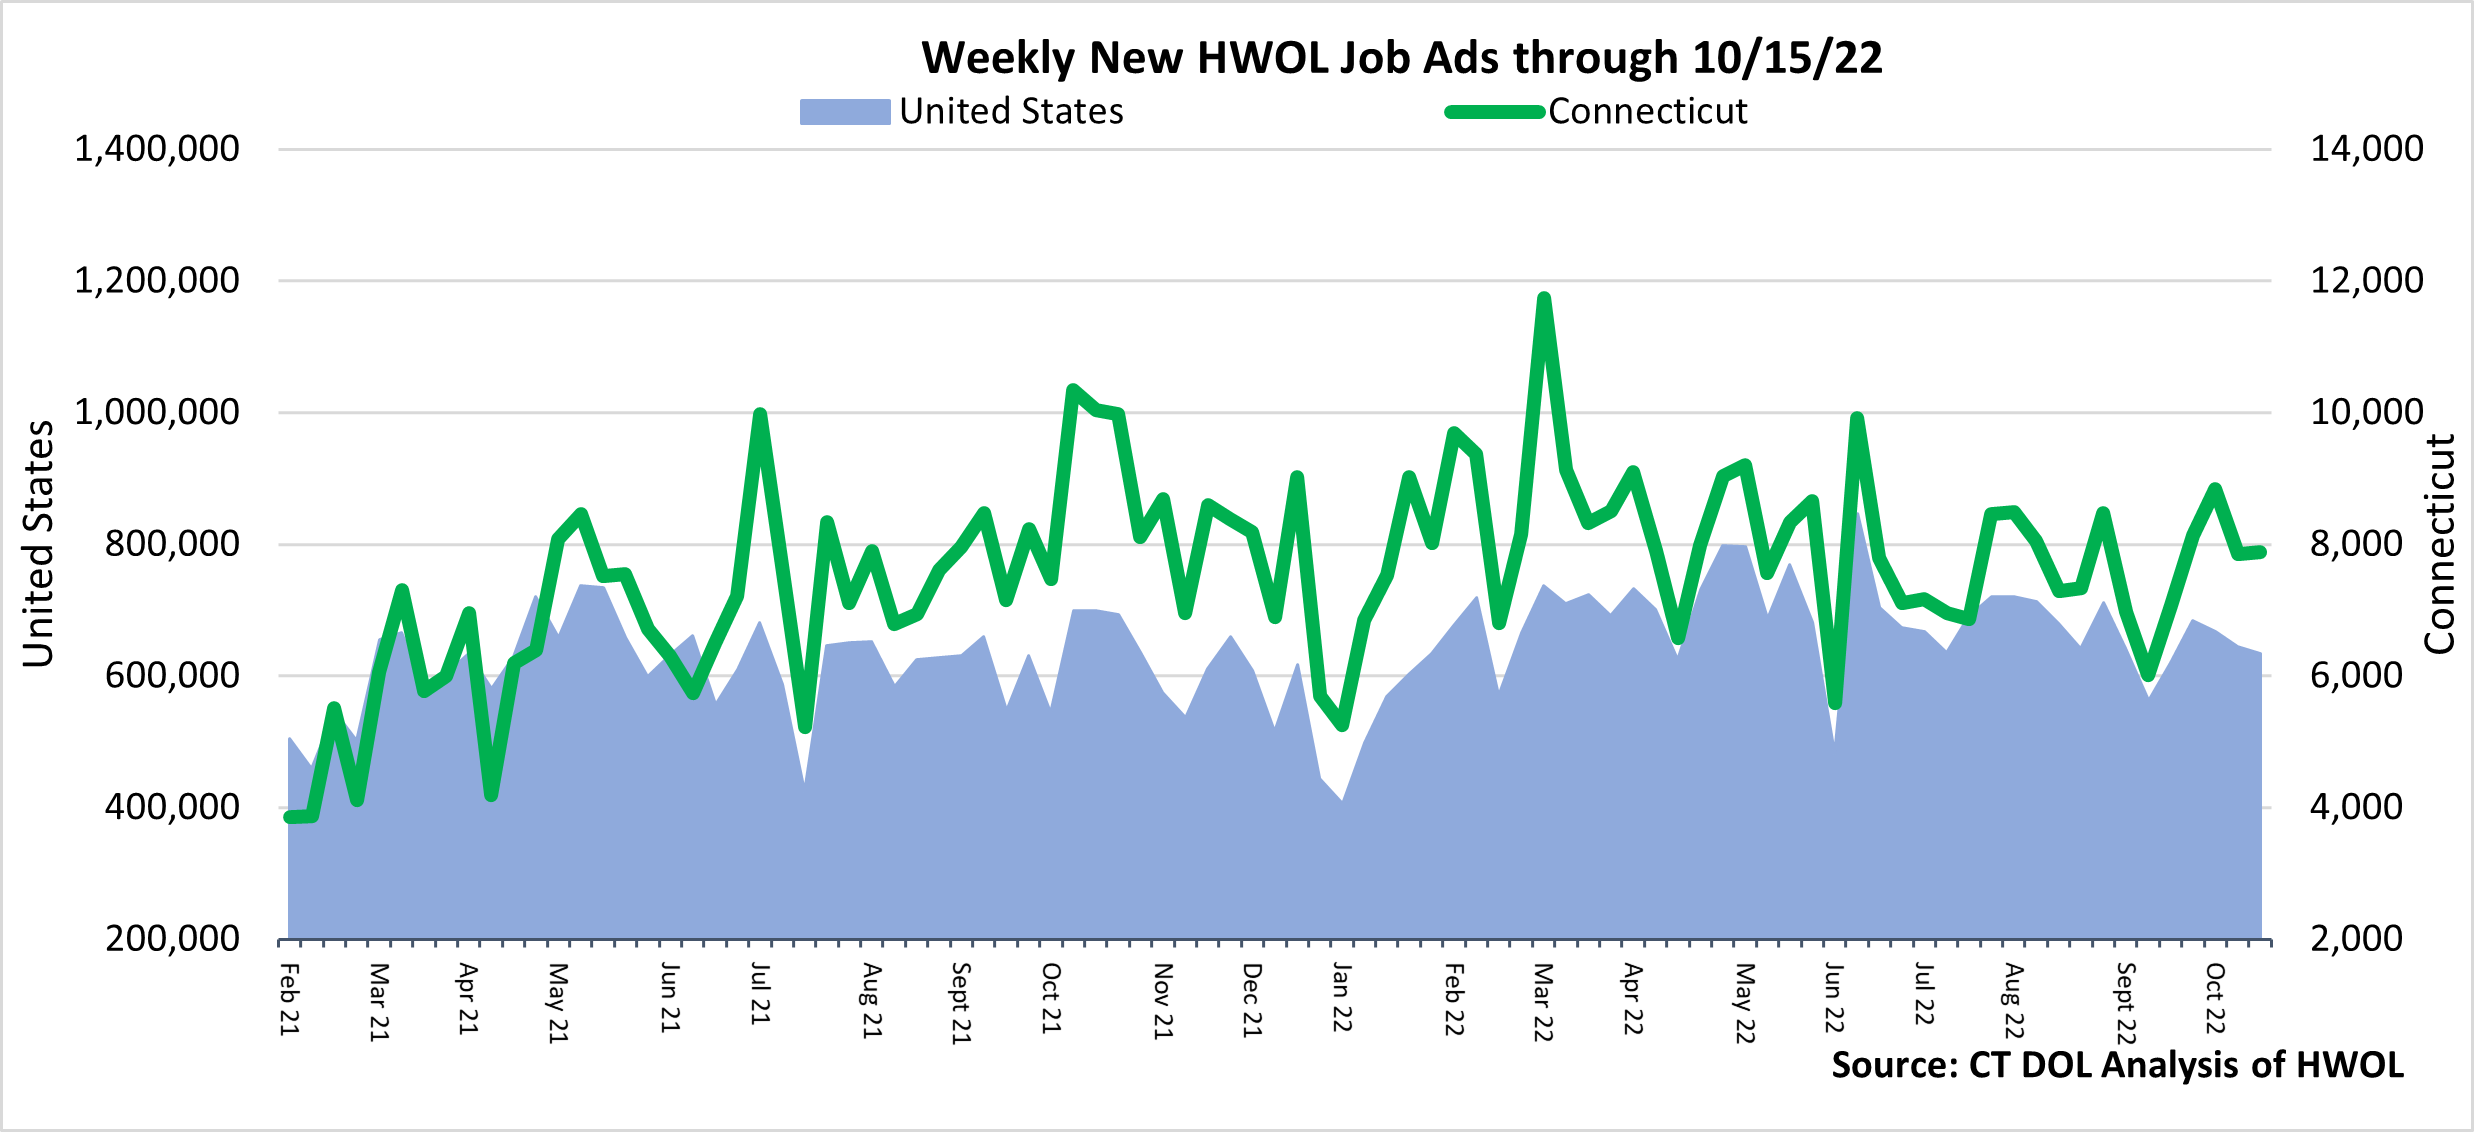 Connecticut Weekly Statewide New HWOL Job Ads through 10/15/22